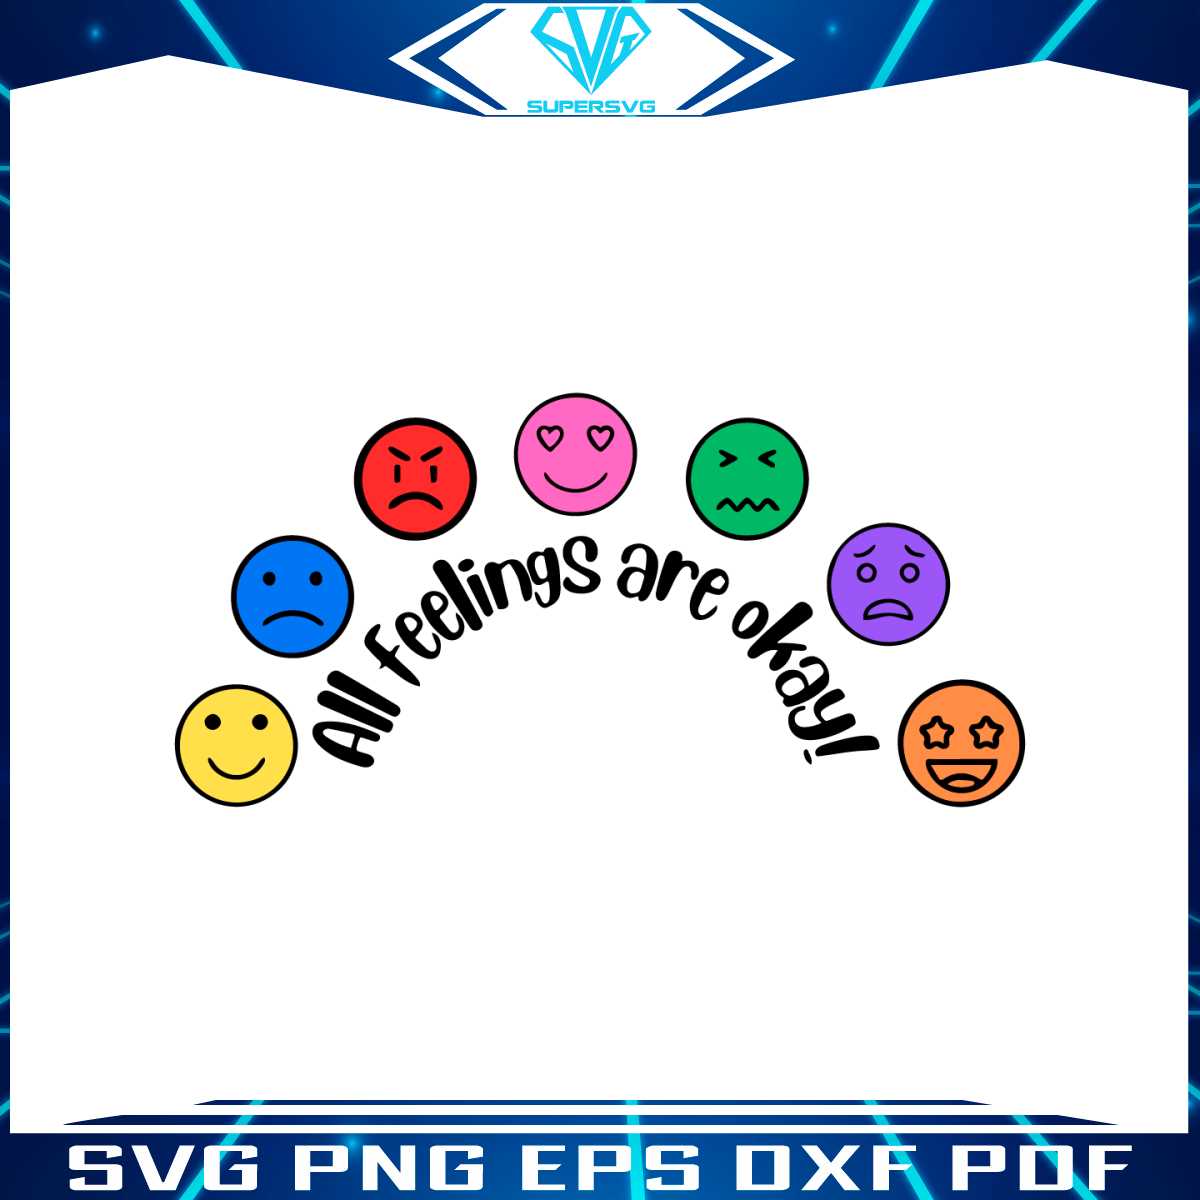 all-feelings-are-okay-positive-quote-svg-cutting-digital-file